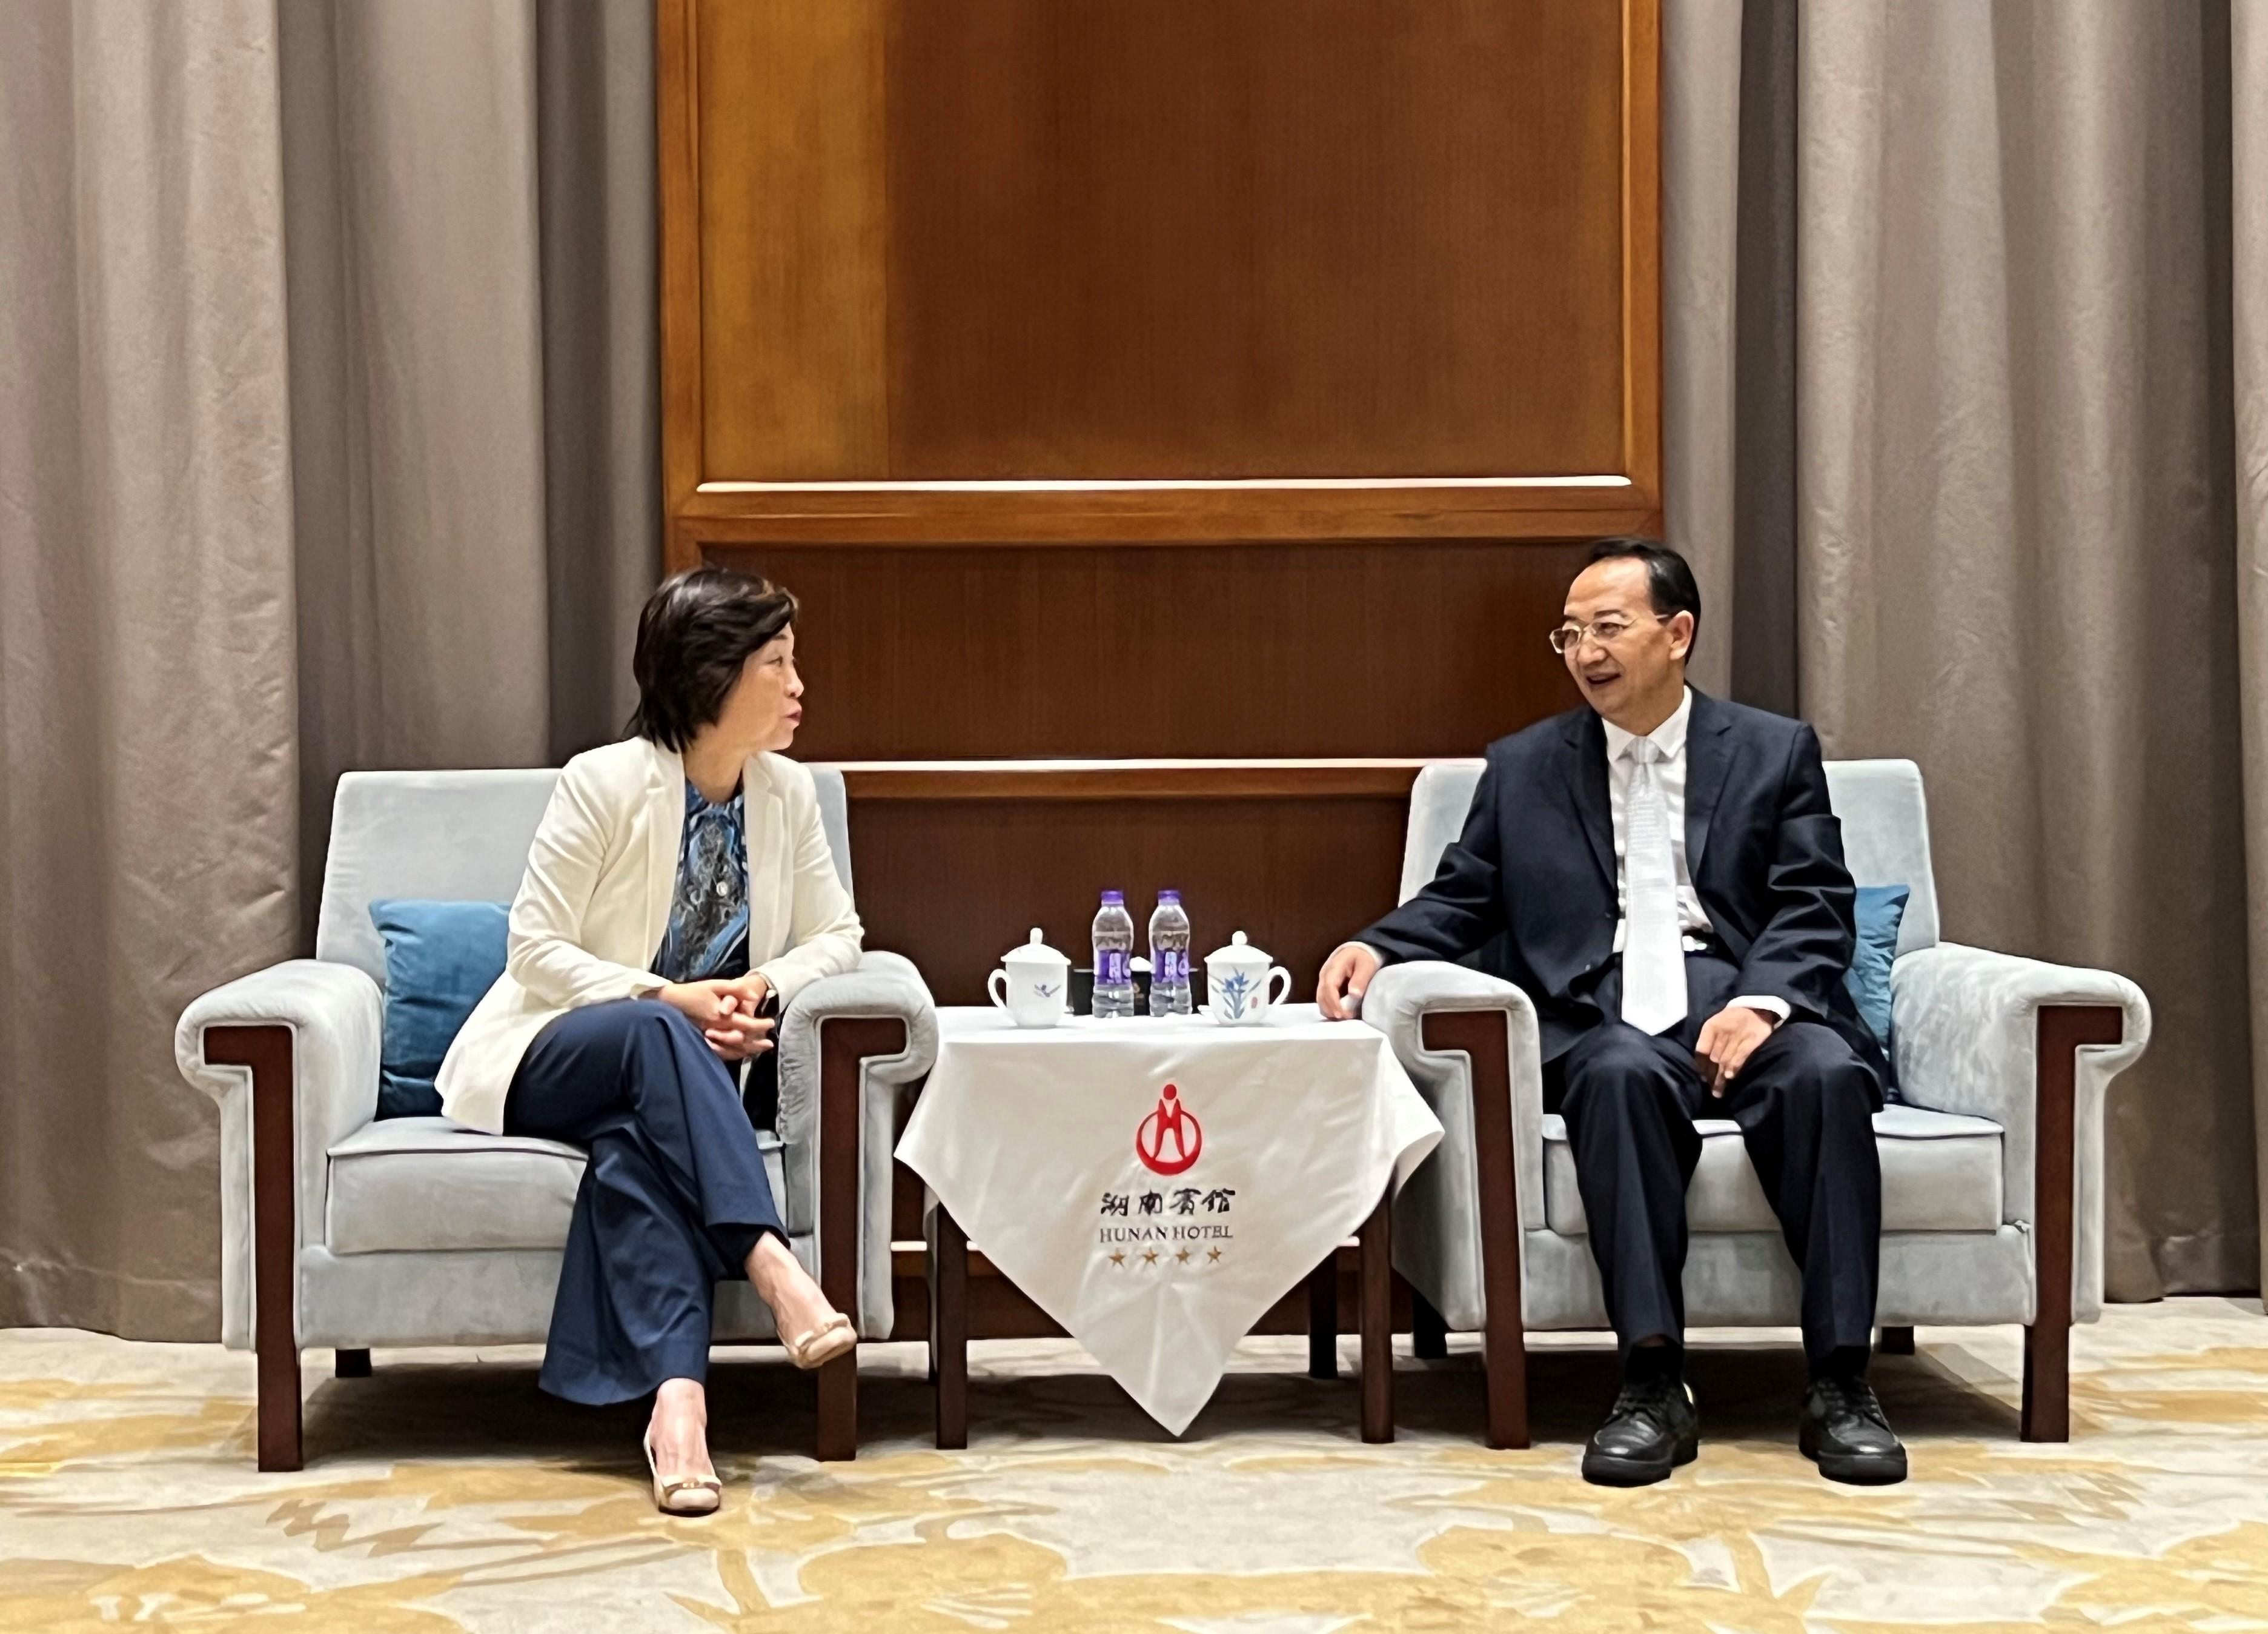 The Secretary for Education, Dr Choi Yuk-lin, led the National Day and Professional Exchange Delegation from Hong Kong Education Sector to visit Changsha today (September 23). Photo shows Dr Choi (left) meeting with Member of the Standing Committee and Head of Publicity Department of CPC Hunan Provincial Committee, Mr Yang Haodong (right), to exchange views on multiple issues.